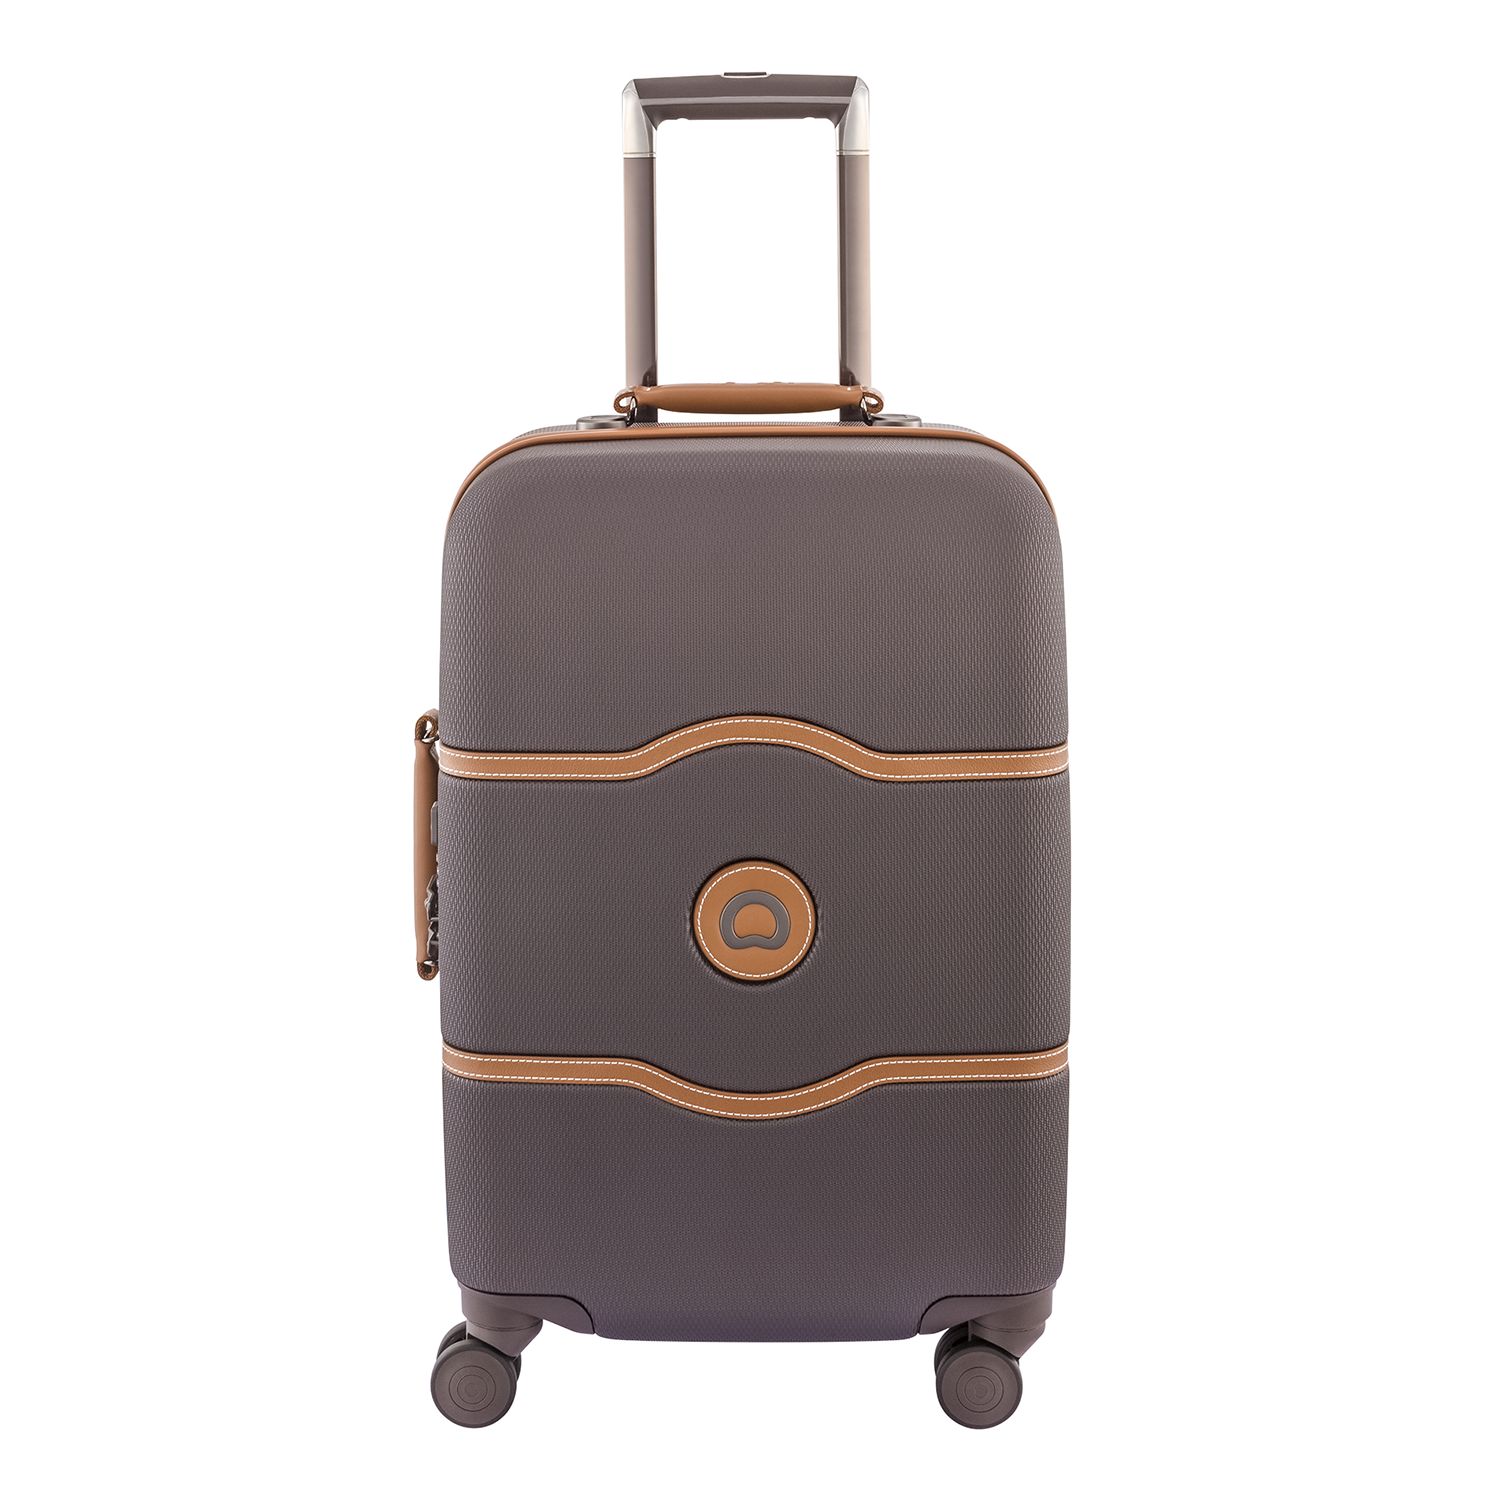 delsey chatelet luggage sale